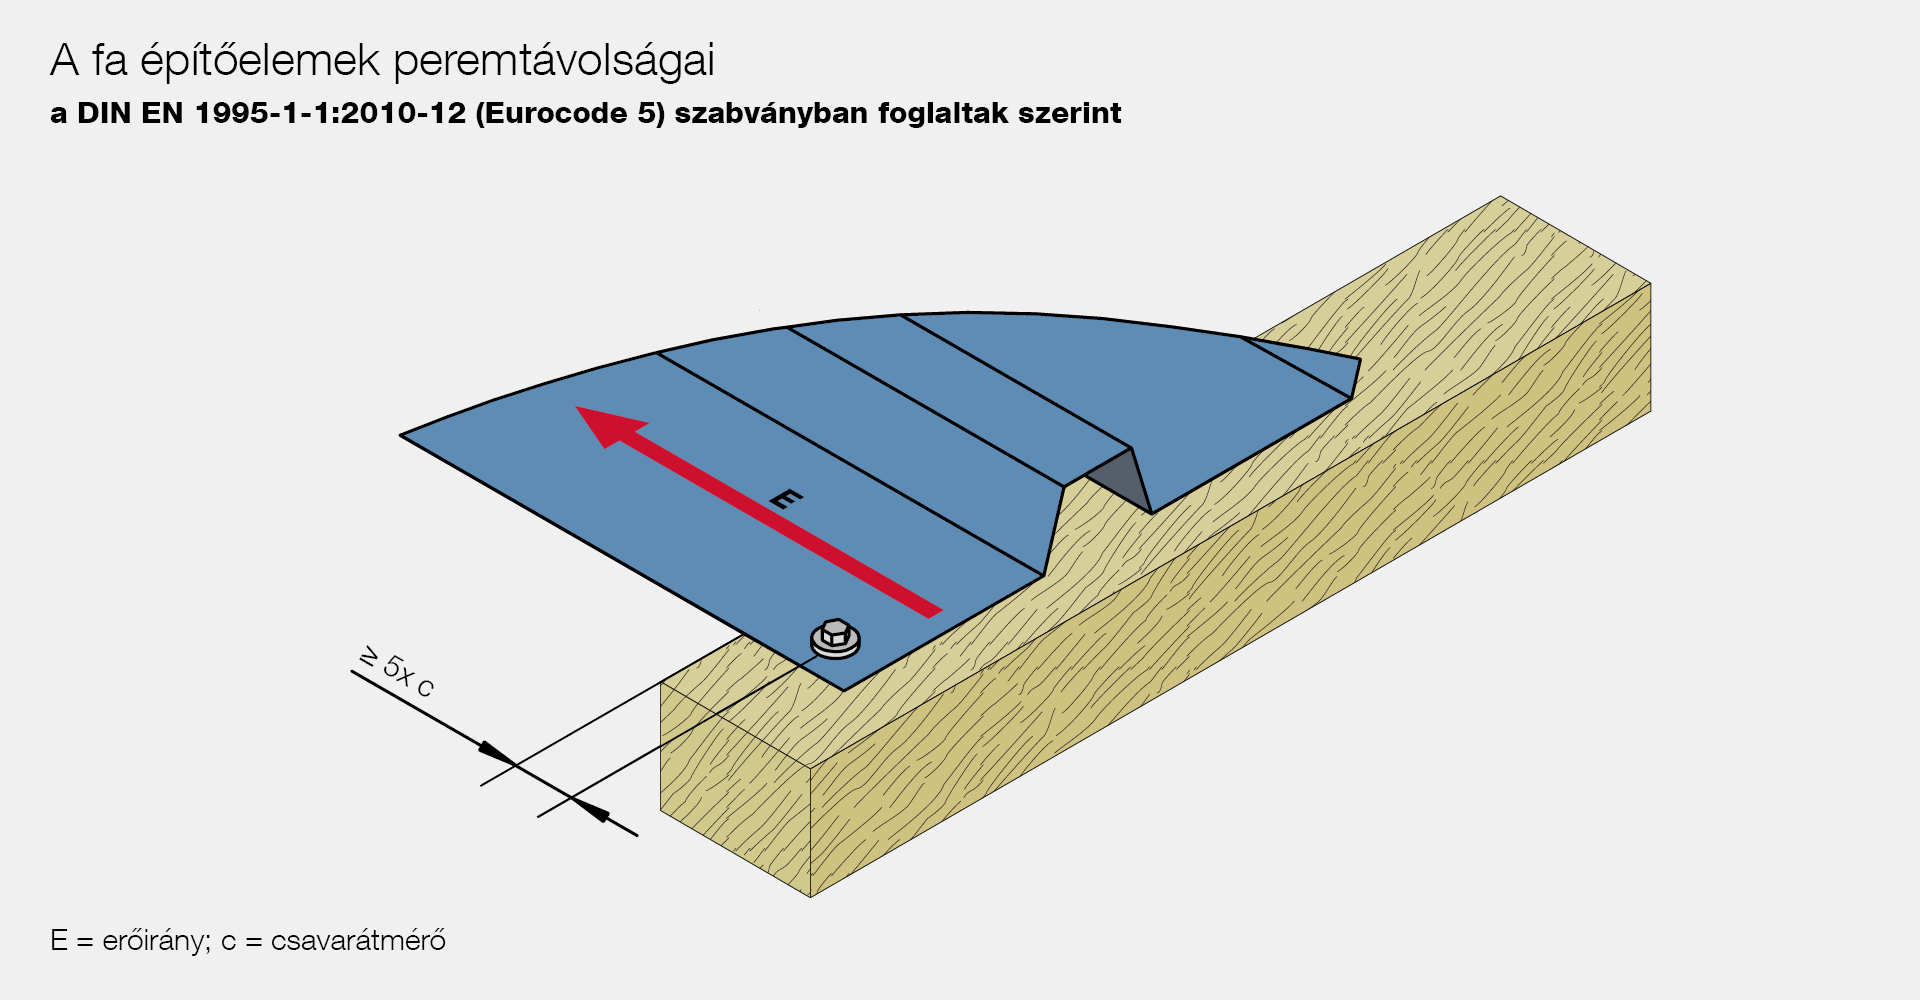 Edge distance to the stressed edge for timber components